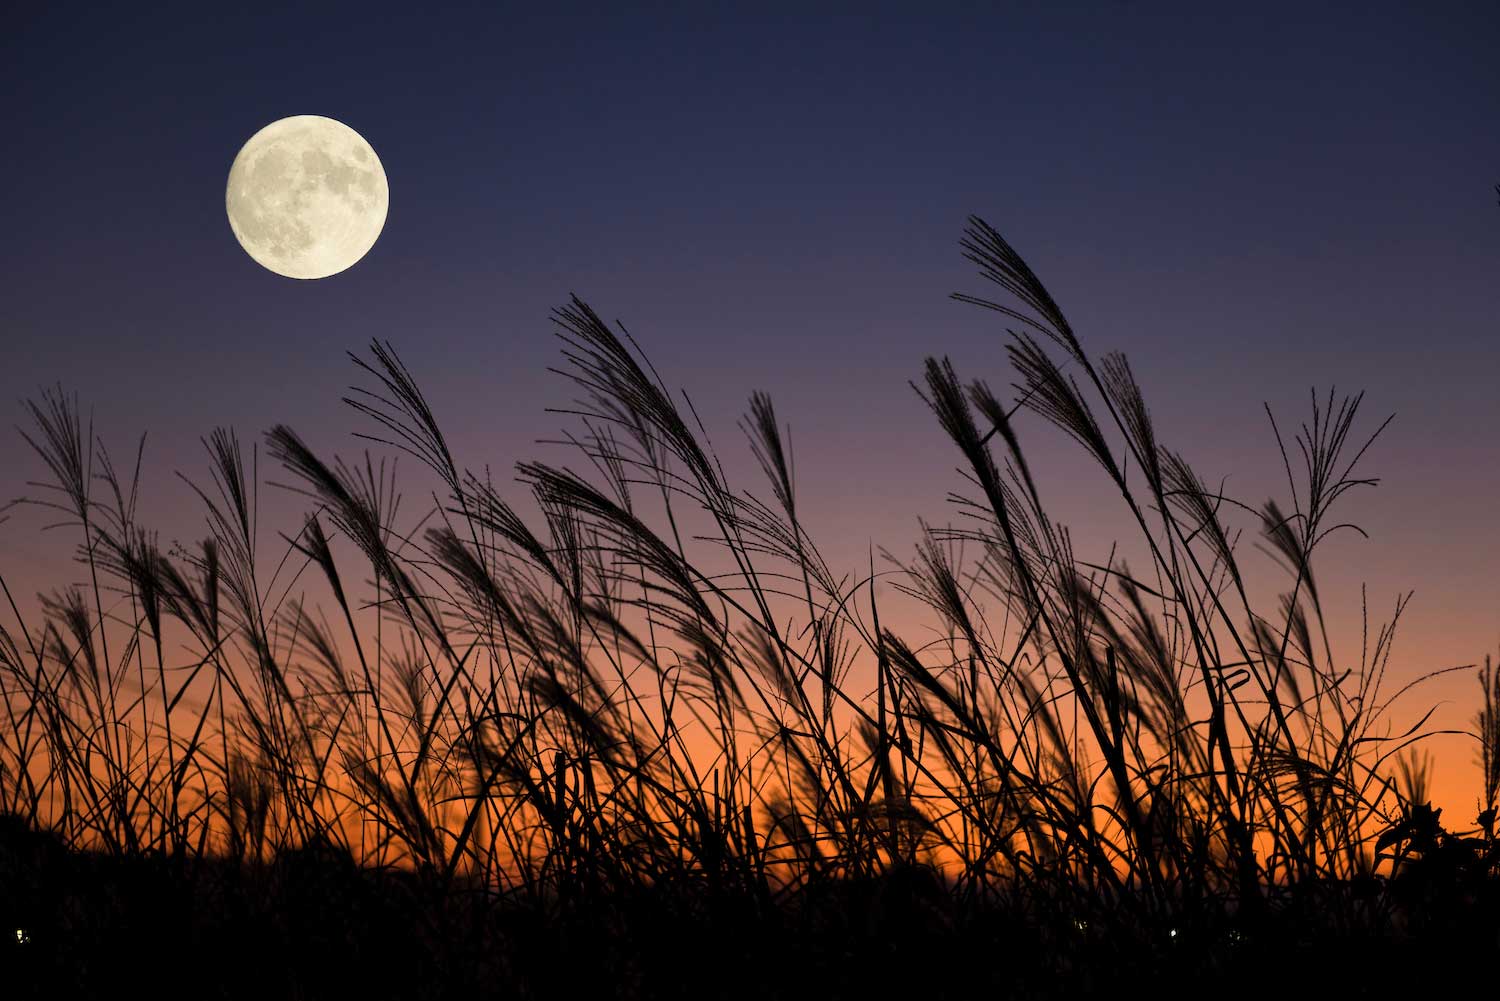 A full moon seen above grasses blowing in the breeze.